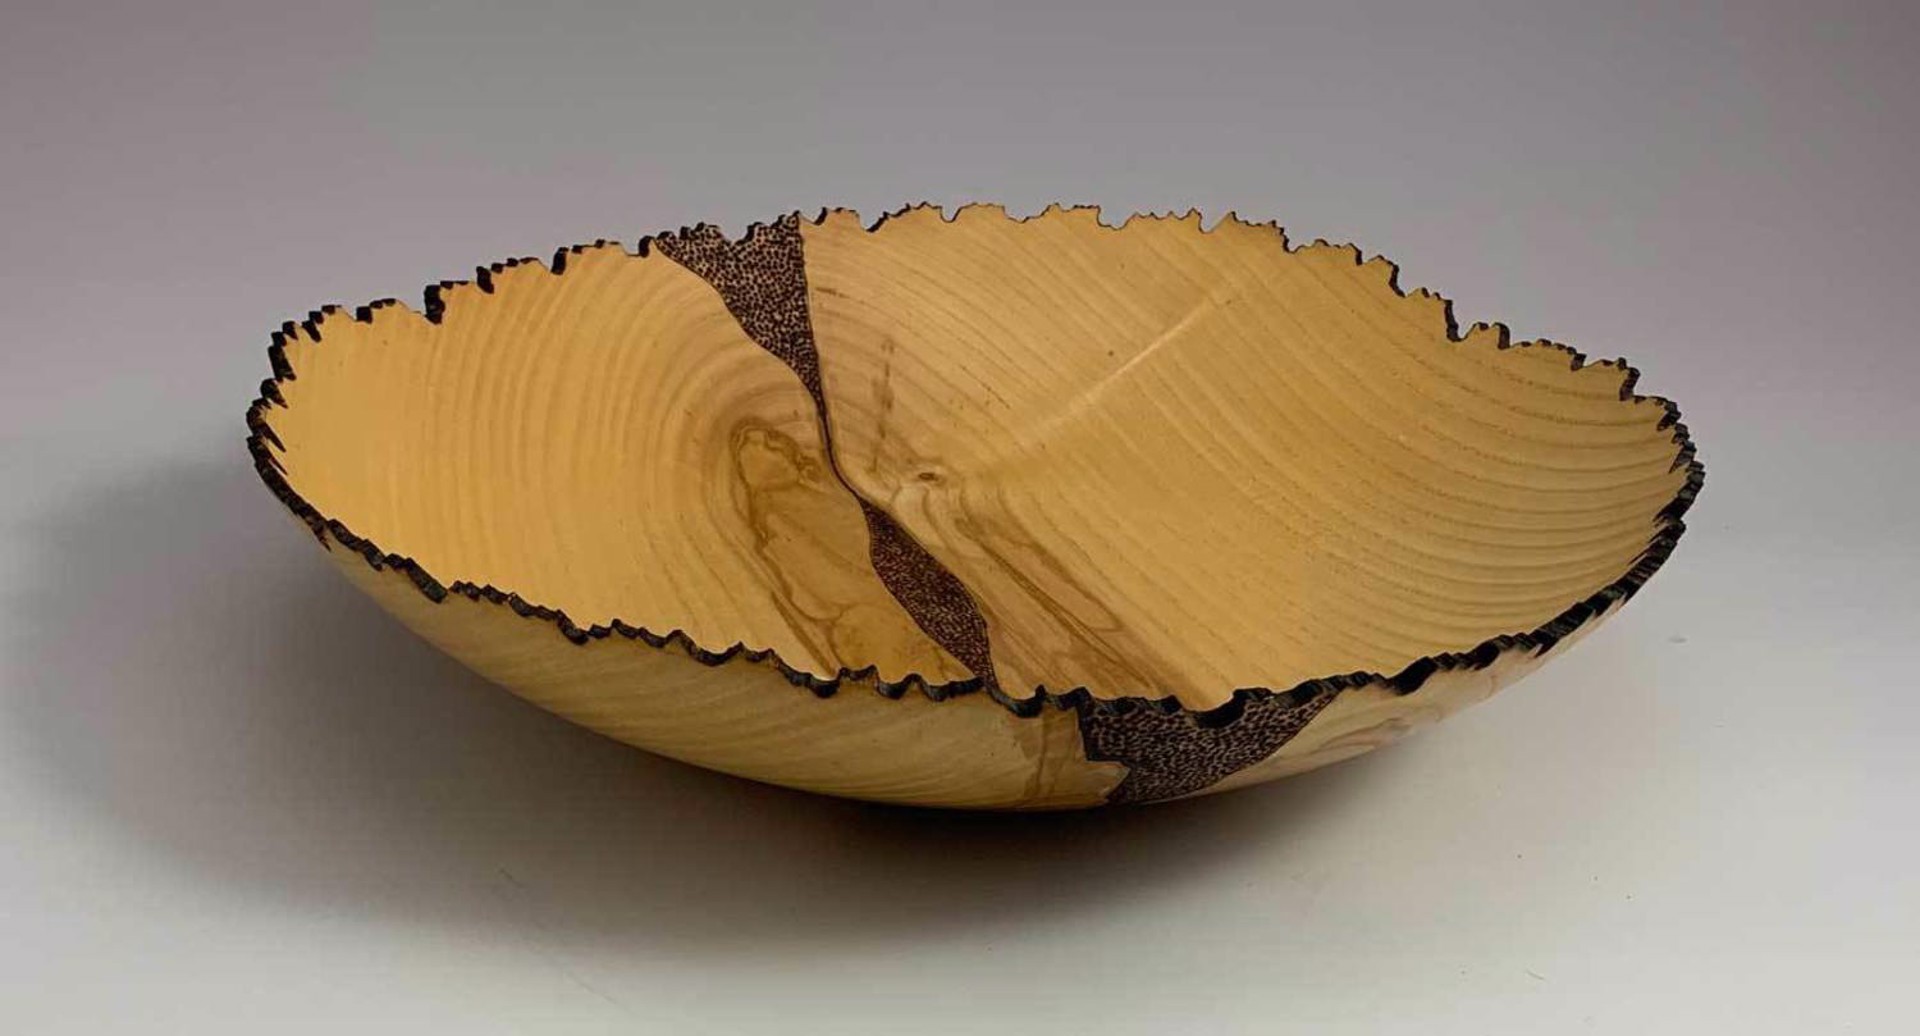 Ash Bowl with Carved and Burned Edges by Frank Didomizio